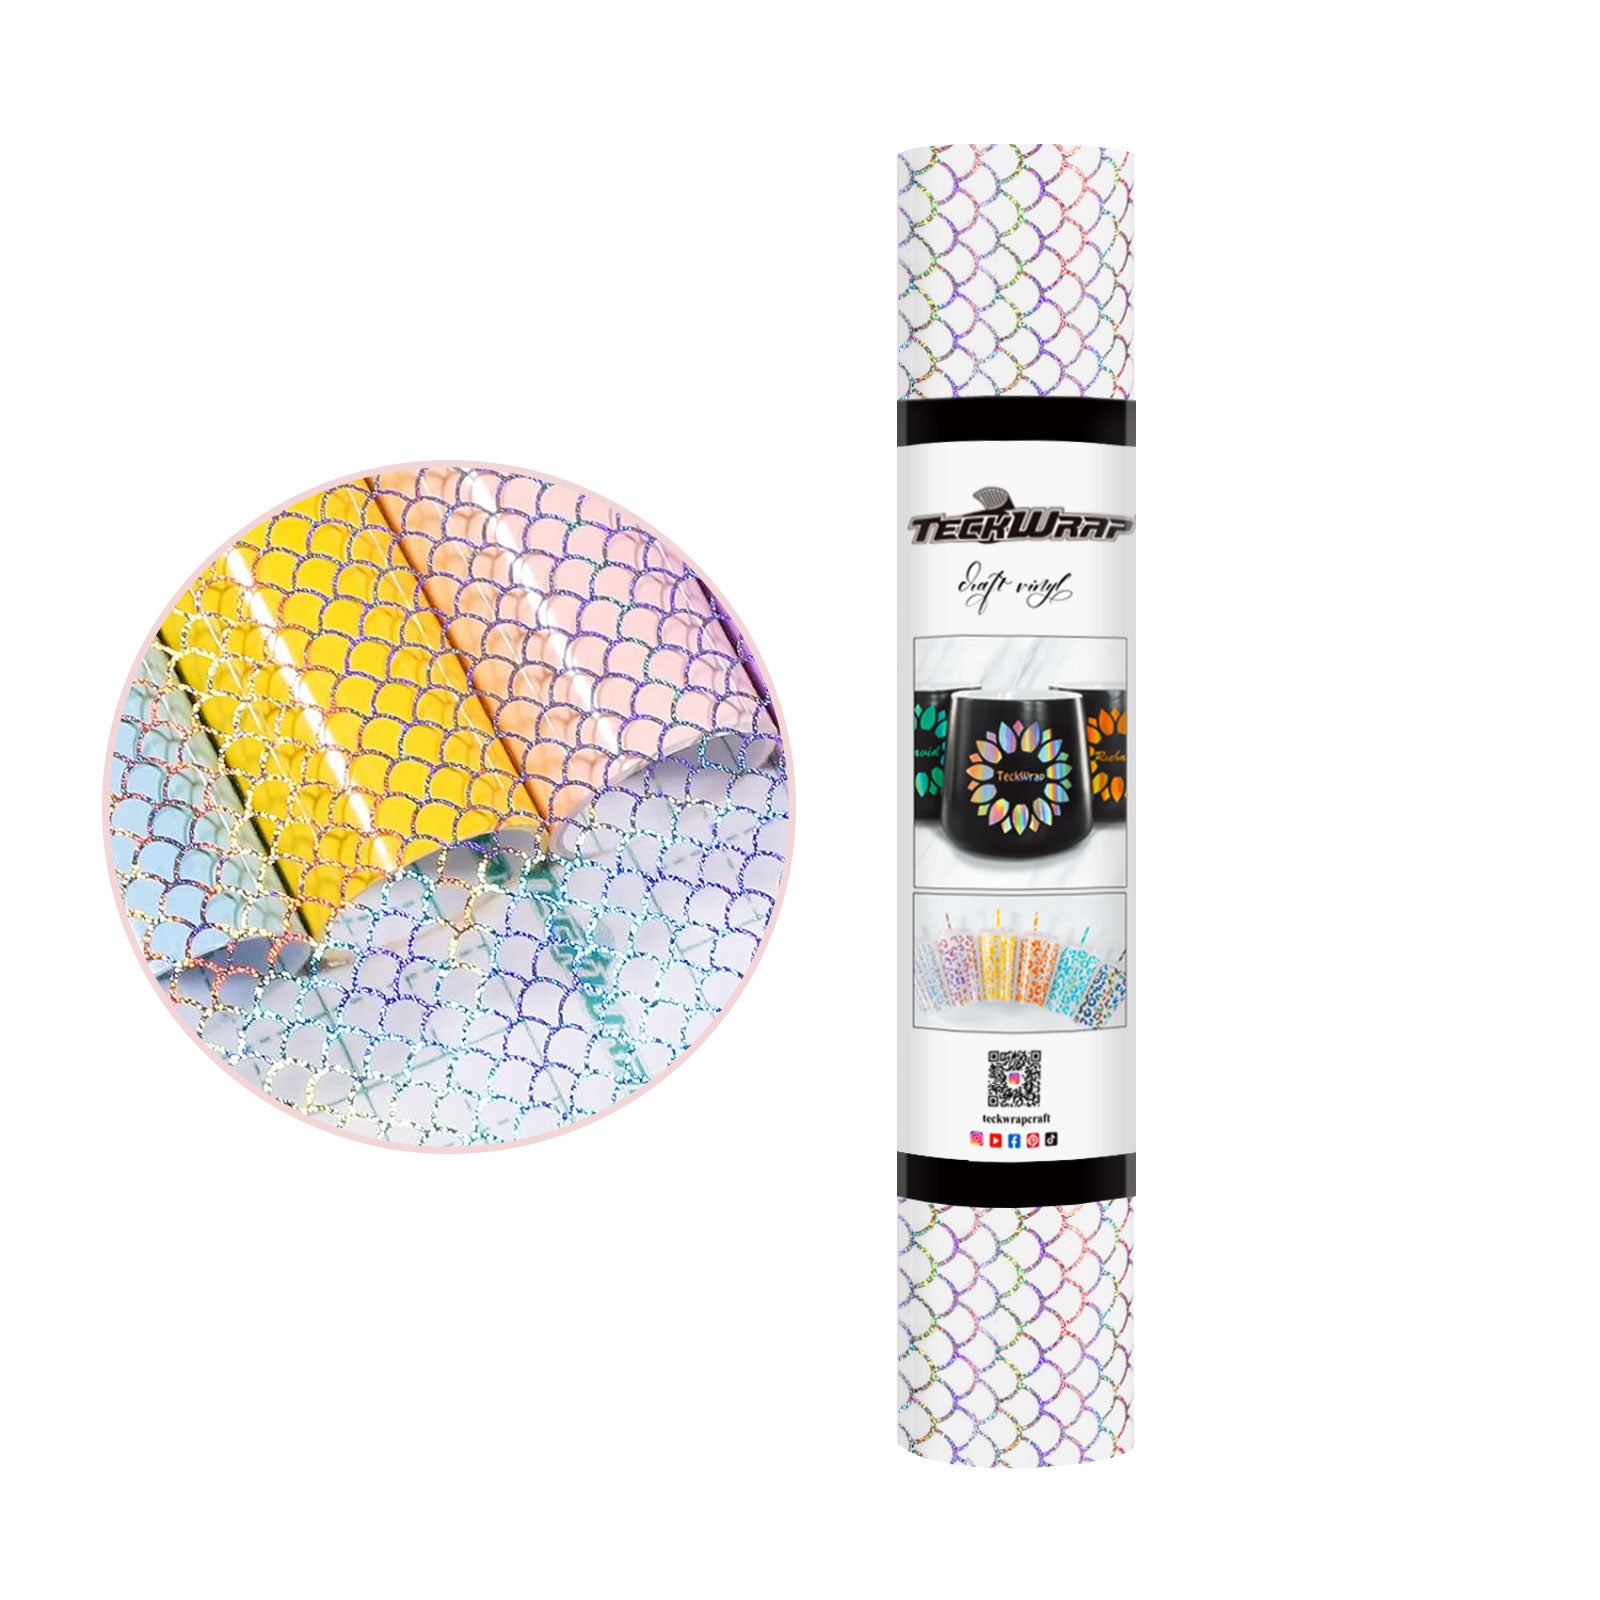 Holographic Opal Pattern Adhesive Vinyl